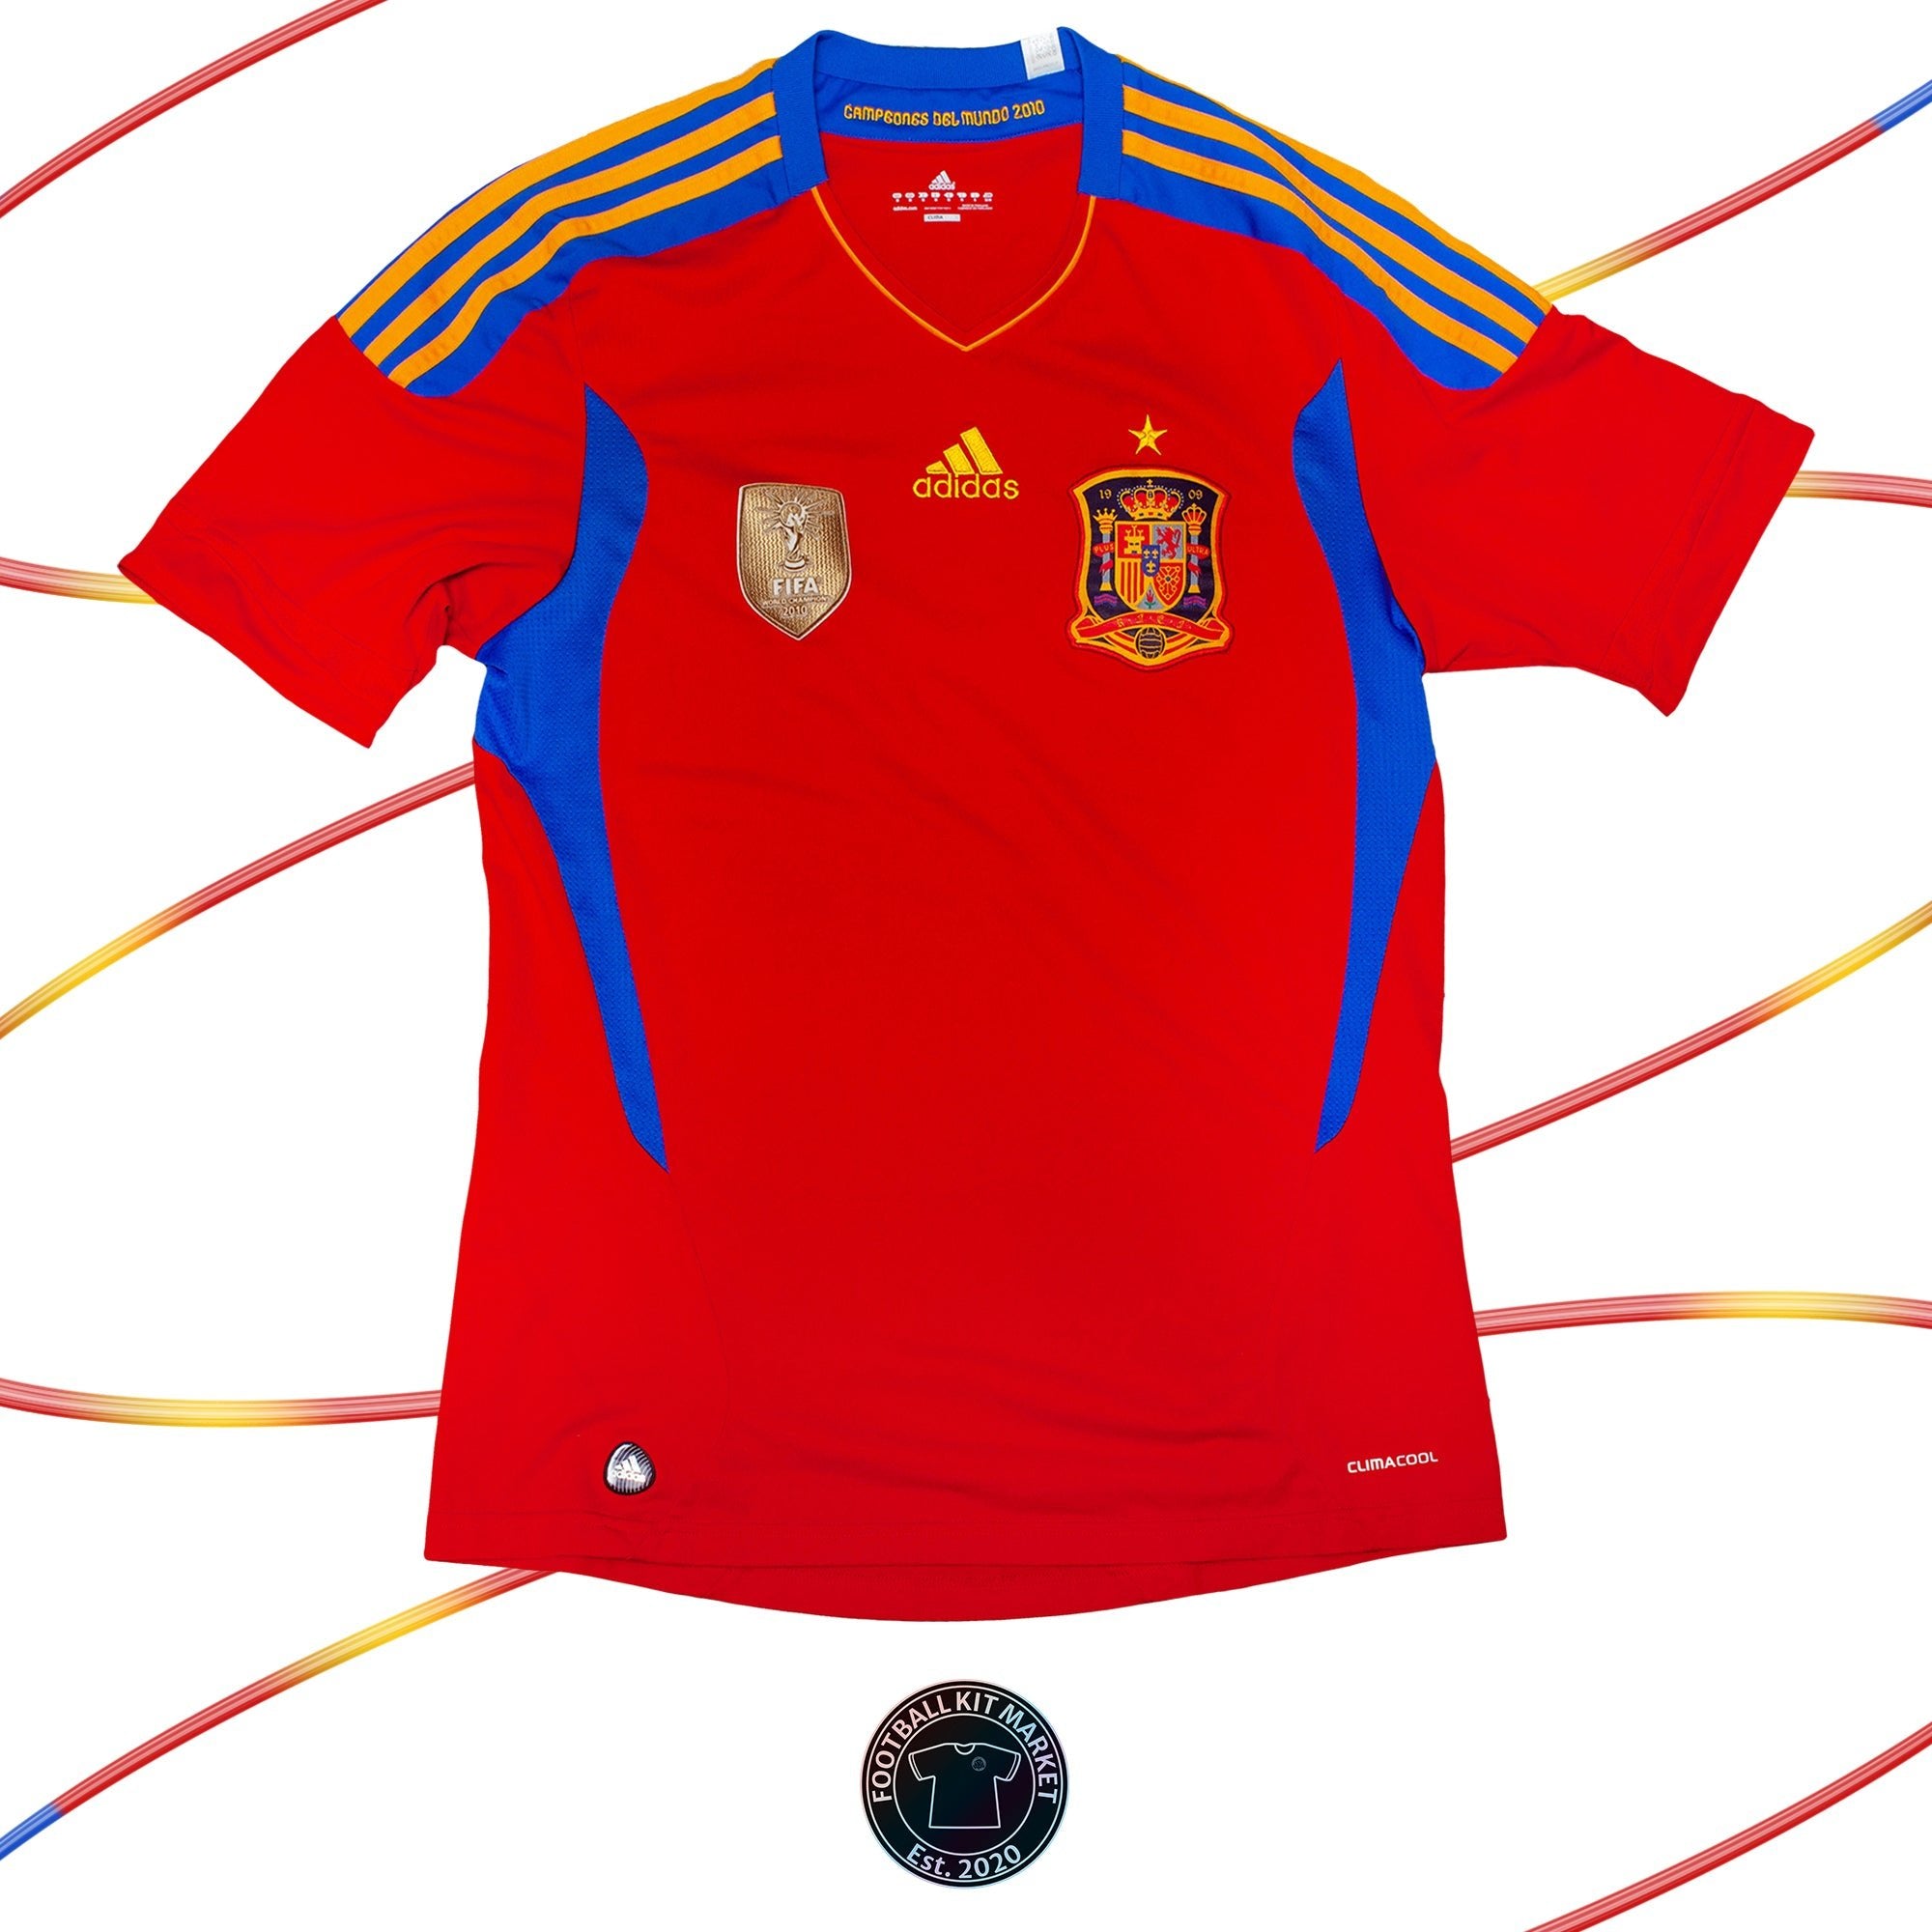 Genuine SPAIN Home (World Champions) Shirt (2011-2012) - ADIDAS (M) - Product Image from Football Kit Market